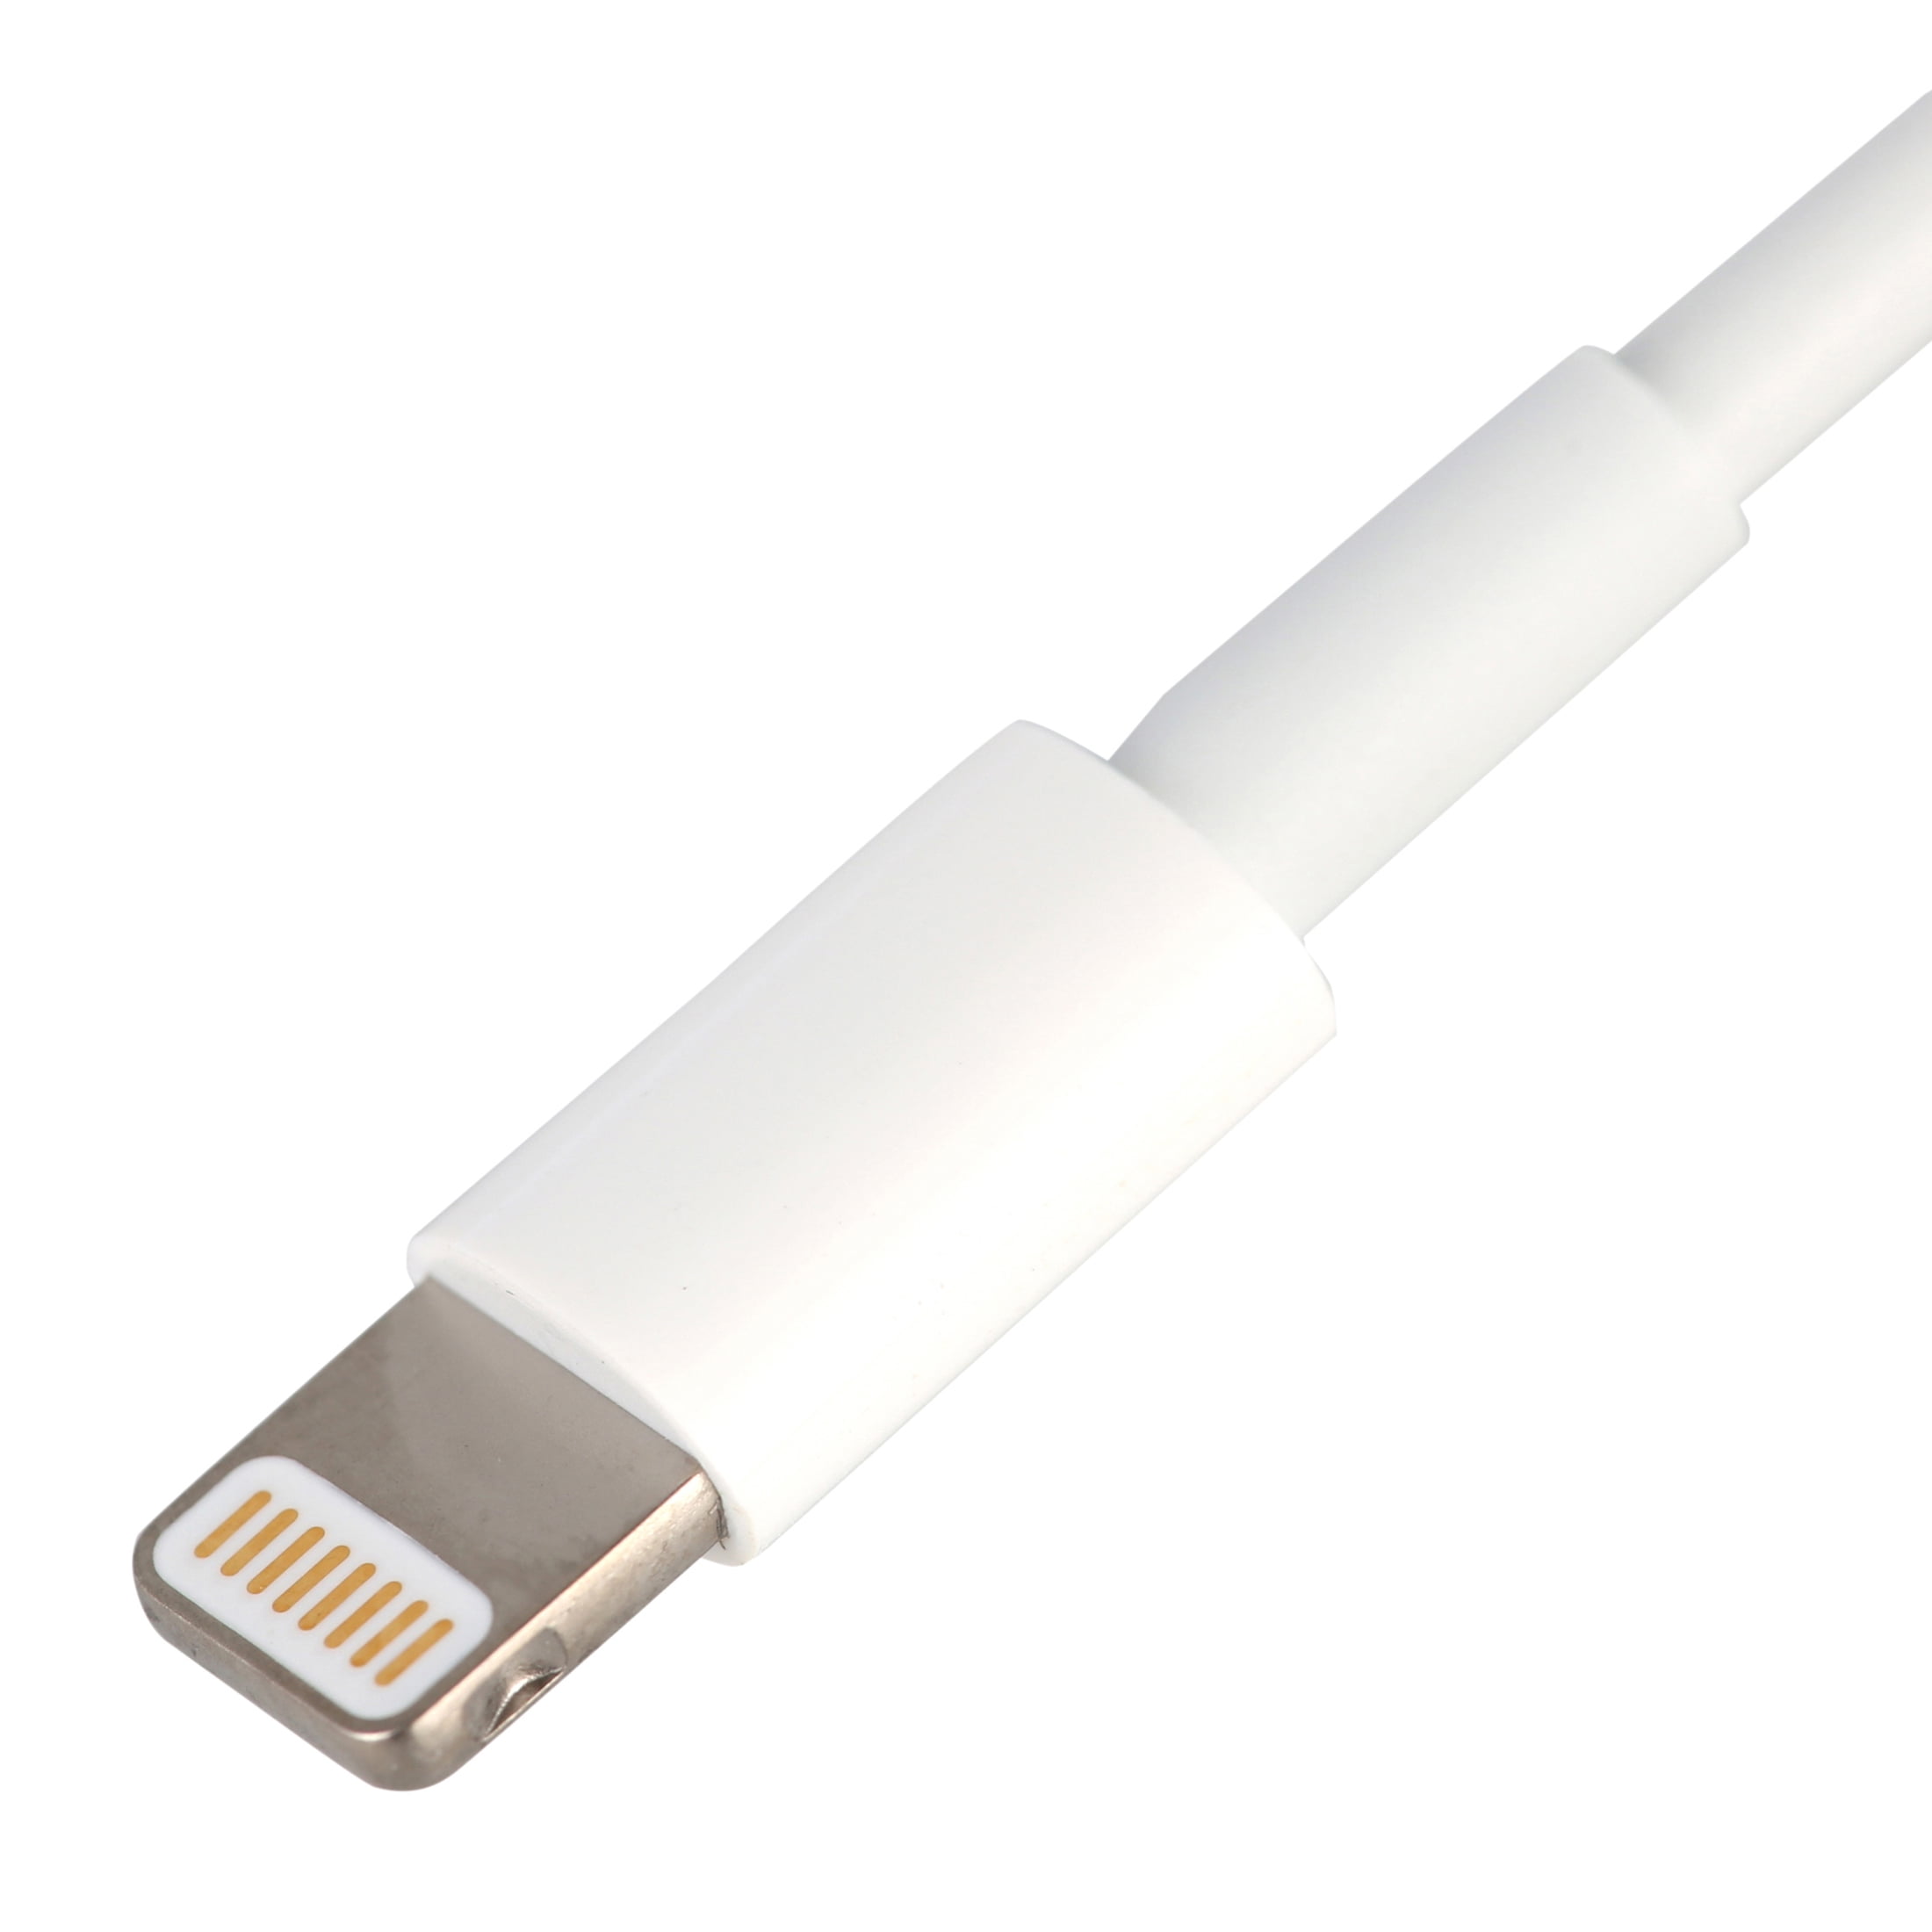 Apple Lightning to USB Charger Sync Cable for iPhone & iPad 2 Meters (6ft)  - A1510 (MD819ZM/A) - Best Deal in Town Las Vegas